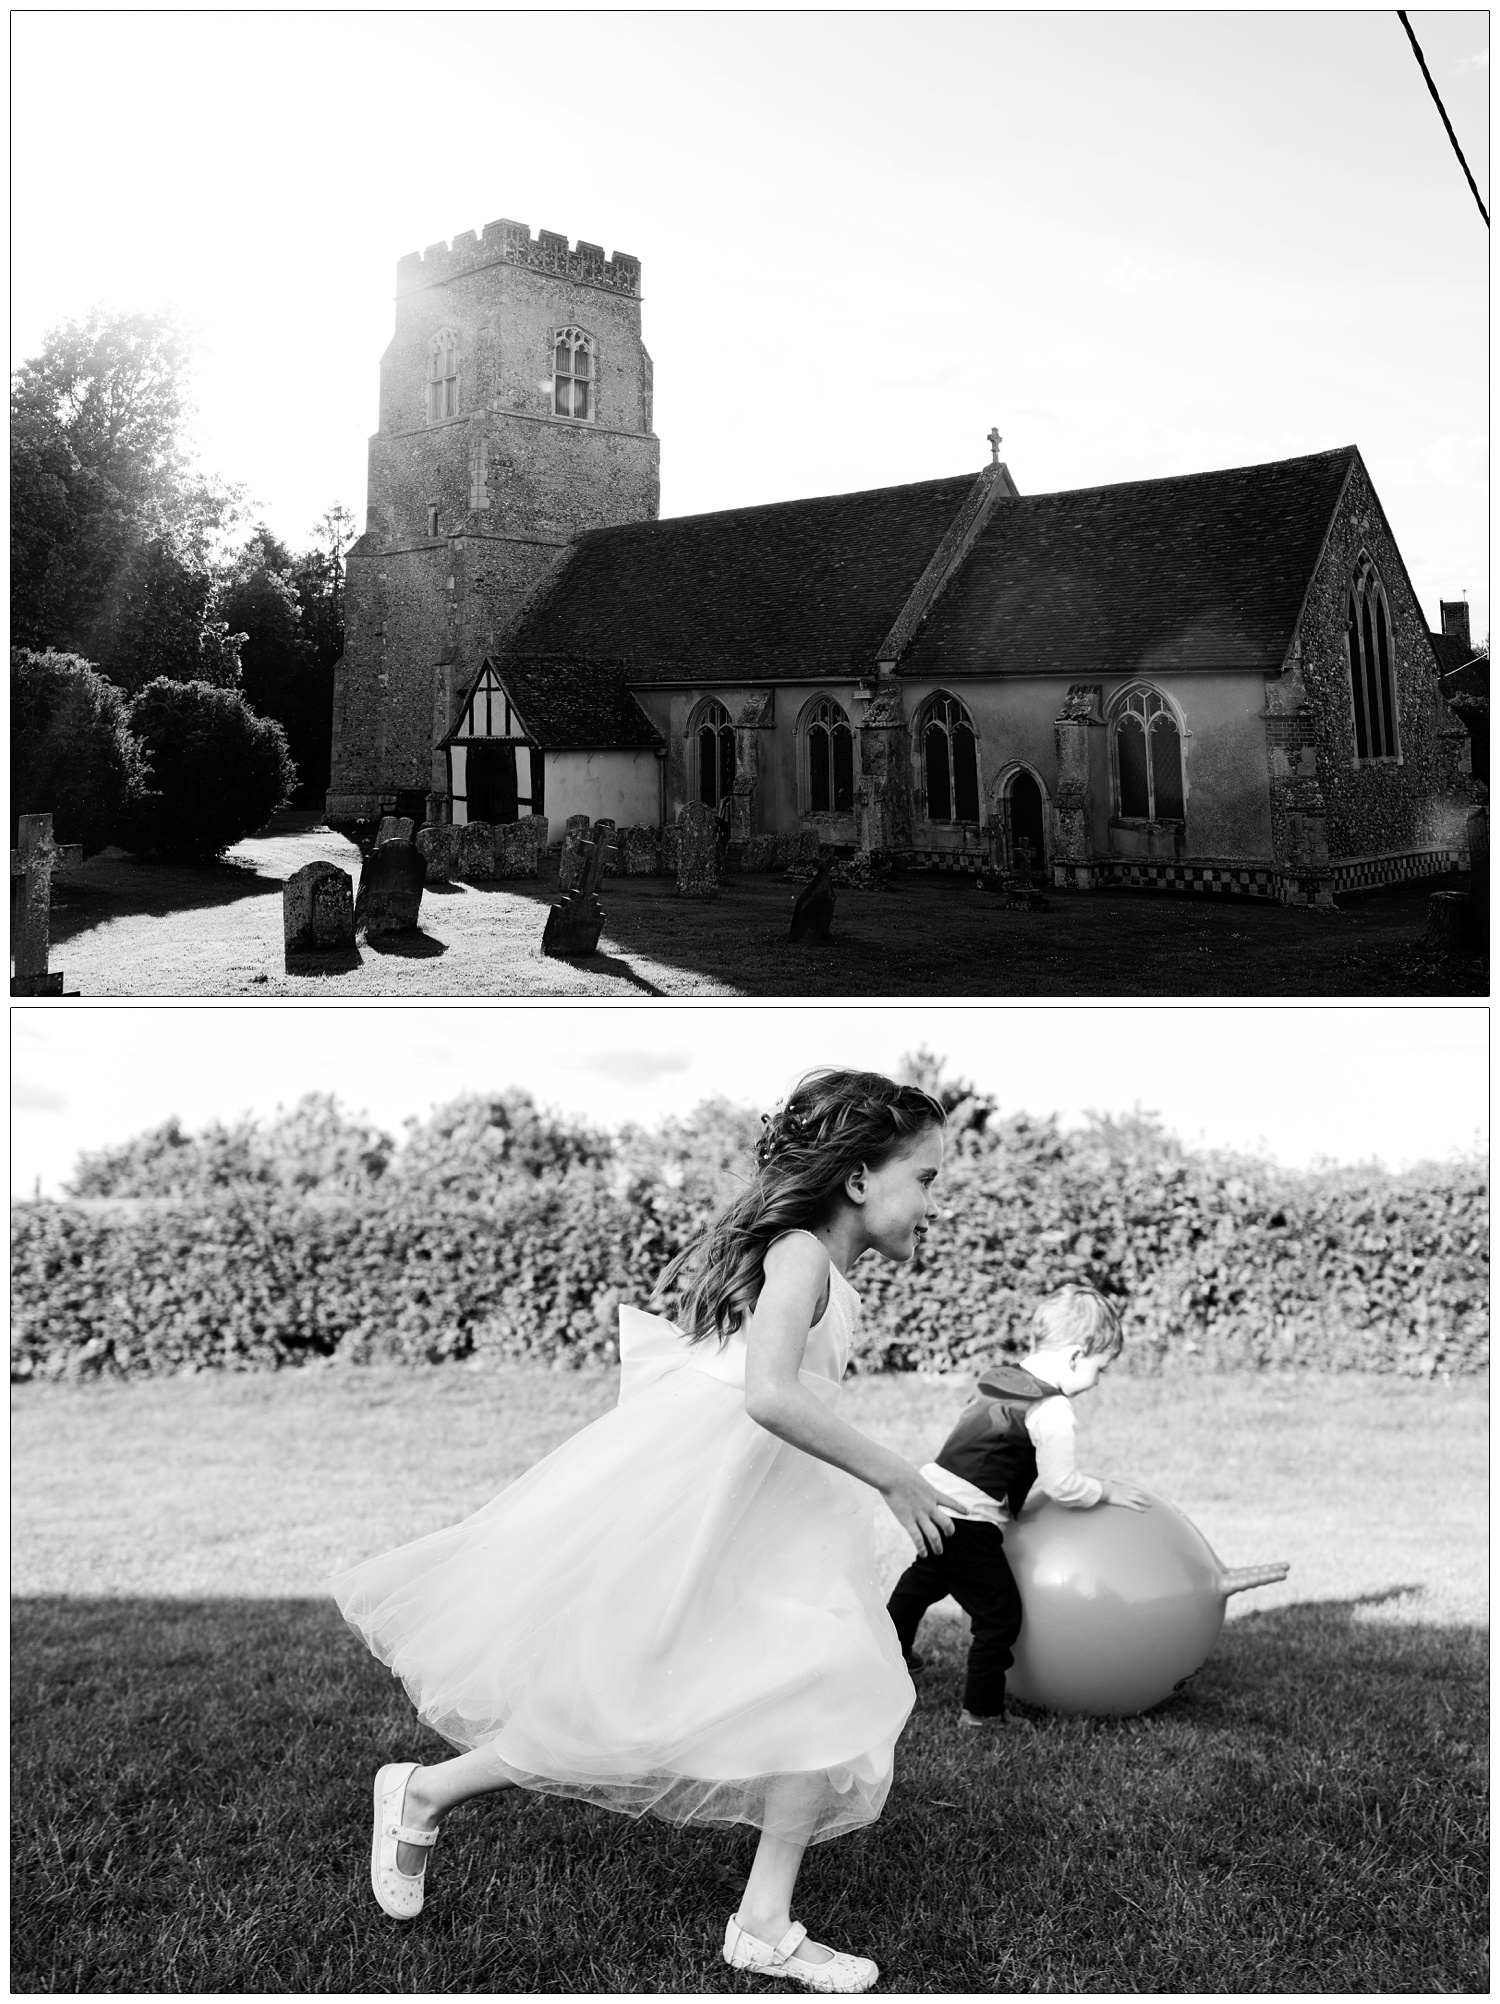 St Peter & St Paul's Church, Alpheton, in black and white. A girl and boy play with a space hopper.